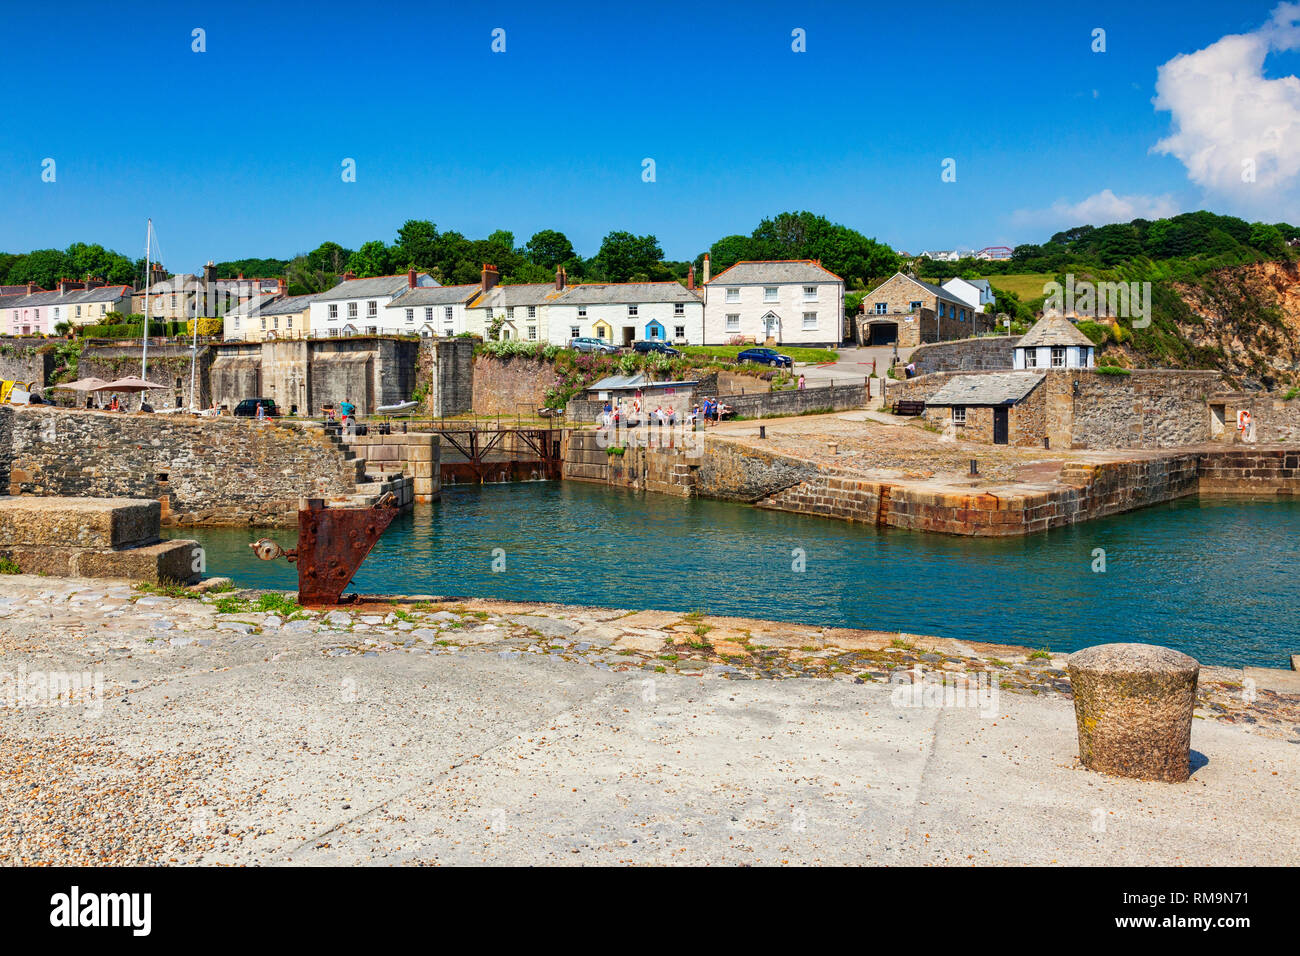 11 June 2018: Charlestown, Cornwall, UK - An unspoiled example of a Georgian working port, it was built between 1791 and 1801, and has been used as a Stock Photo